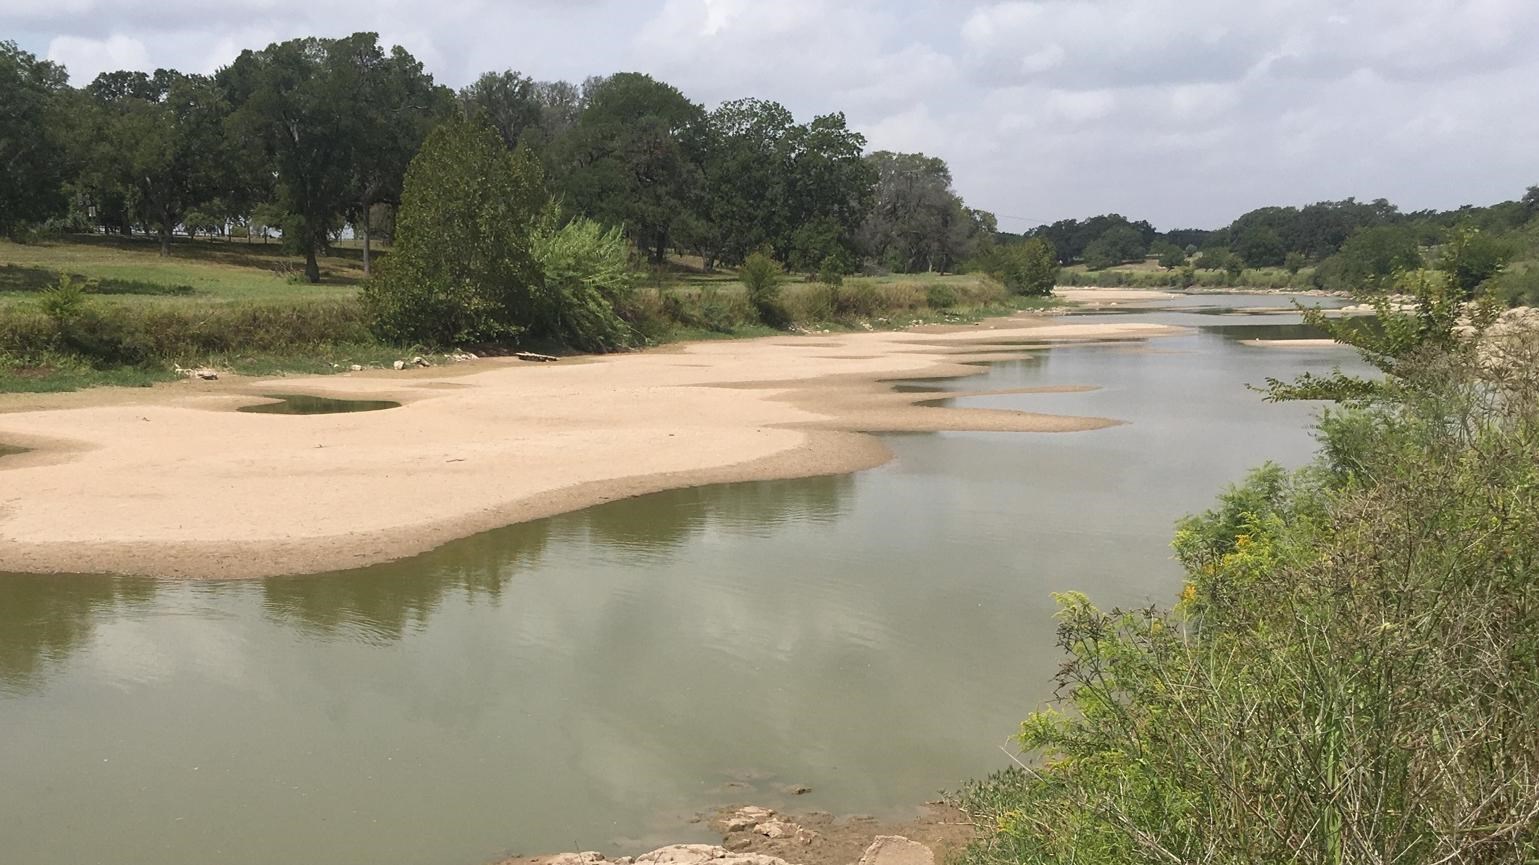 Green brush and live oak trees border a river with so little water that sandbars are exposed.